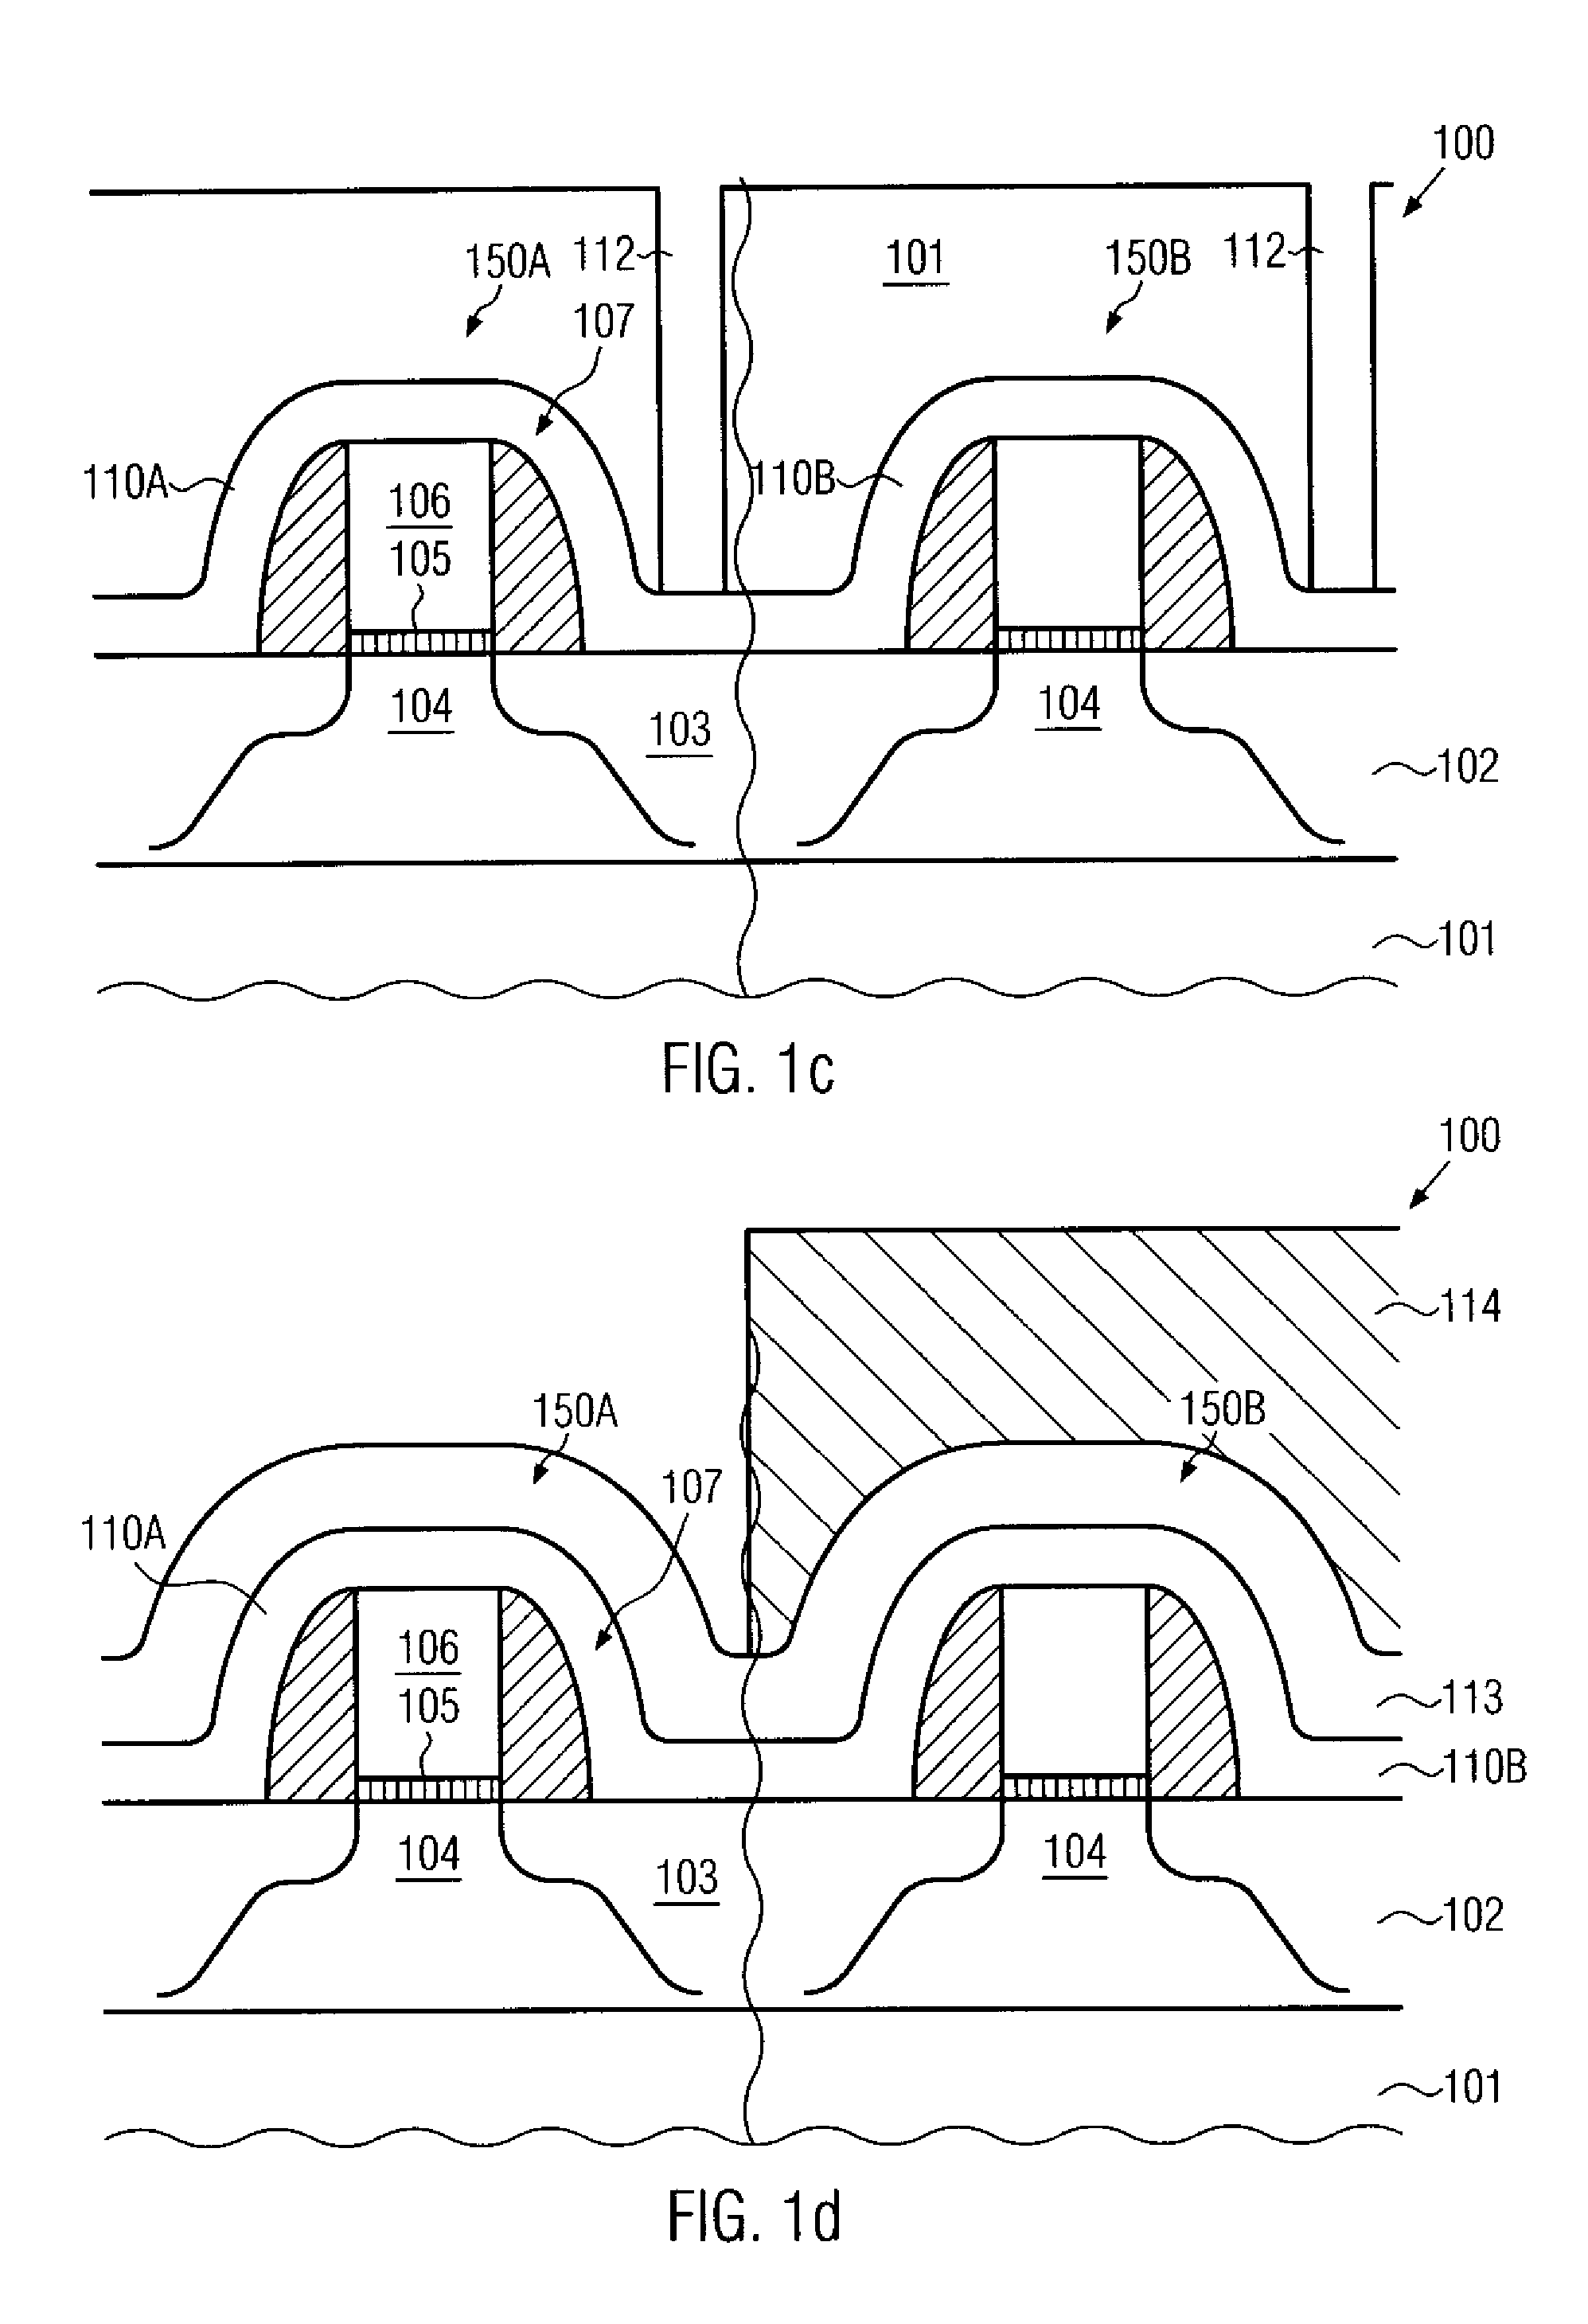 Field effect transistor having an interlayer dielectric material having increased intrinsic stress